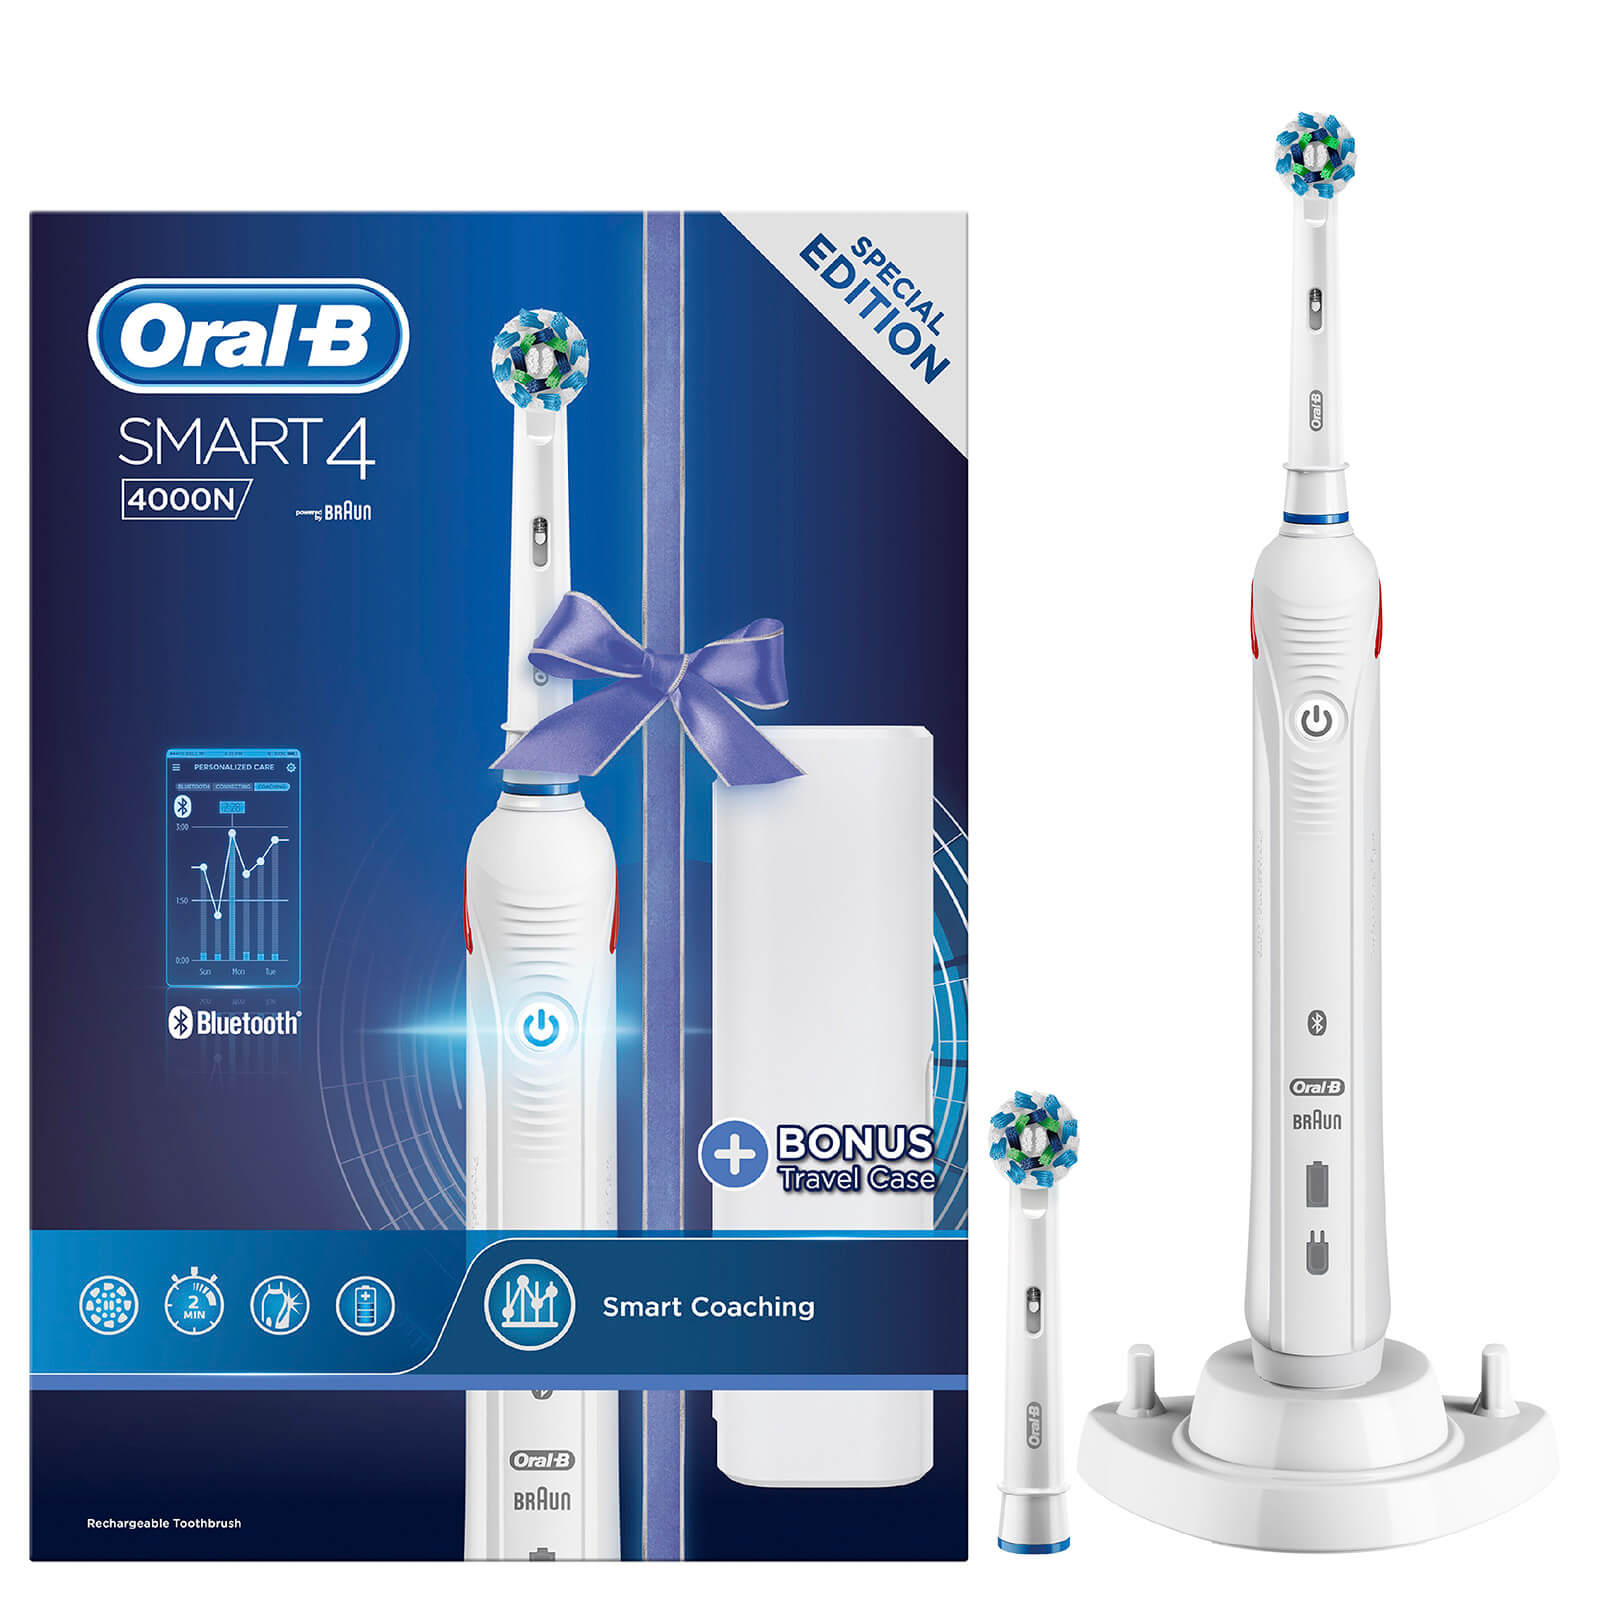 Oral-B Smart 4 4000N Rechargeable Electric Toothbrush – White lookfantastic.com imagine